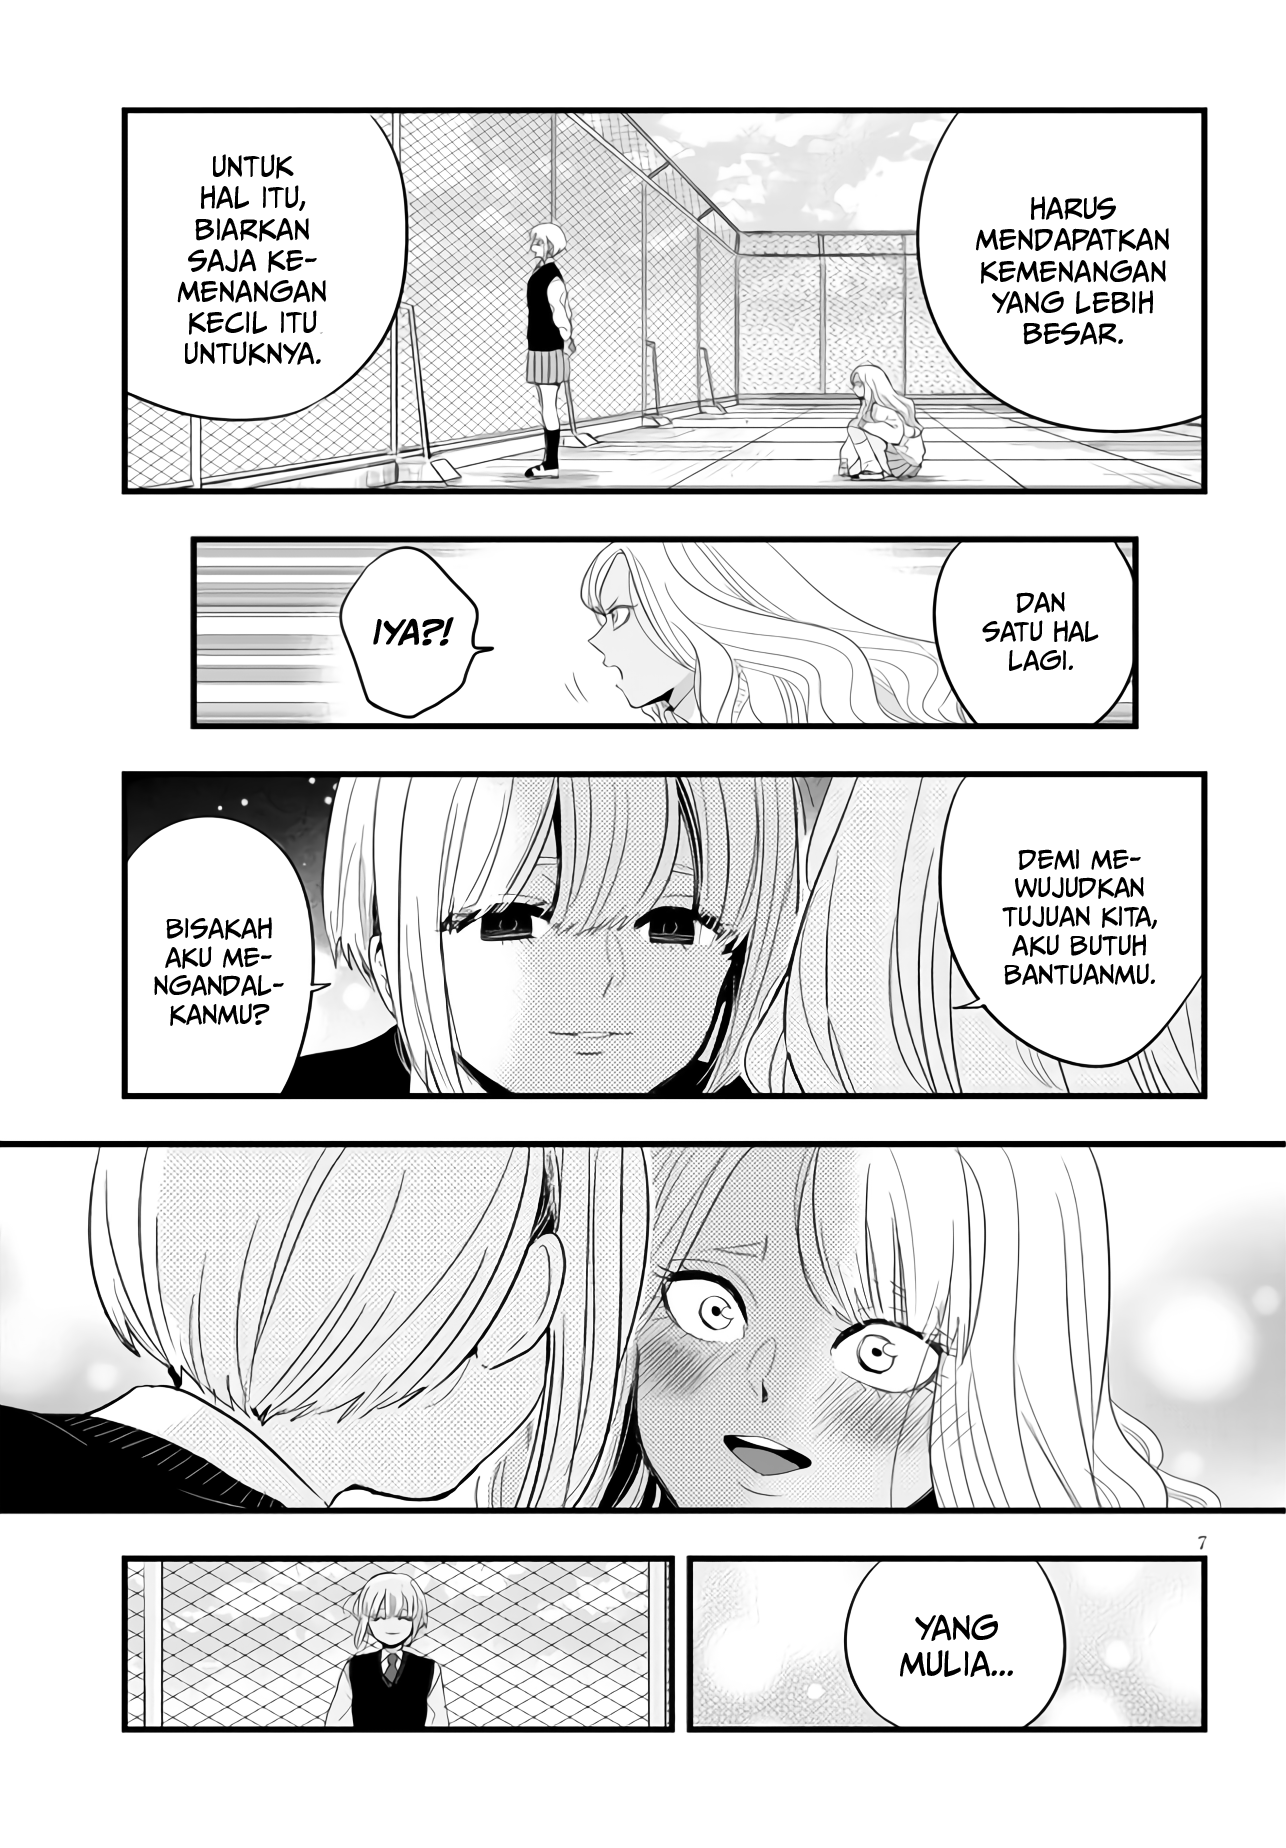 At That Time, The Battle Began (Yandere X Yandere) Chapter 9 - 123